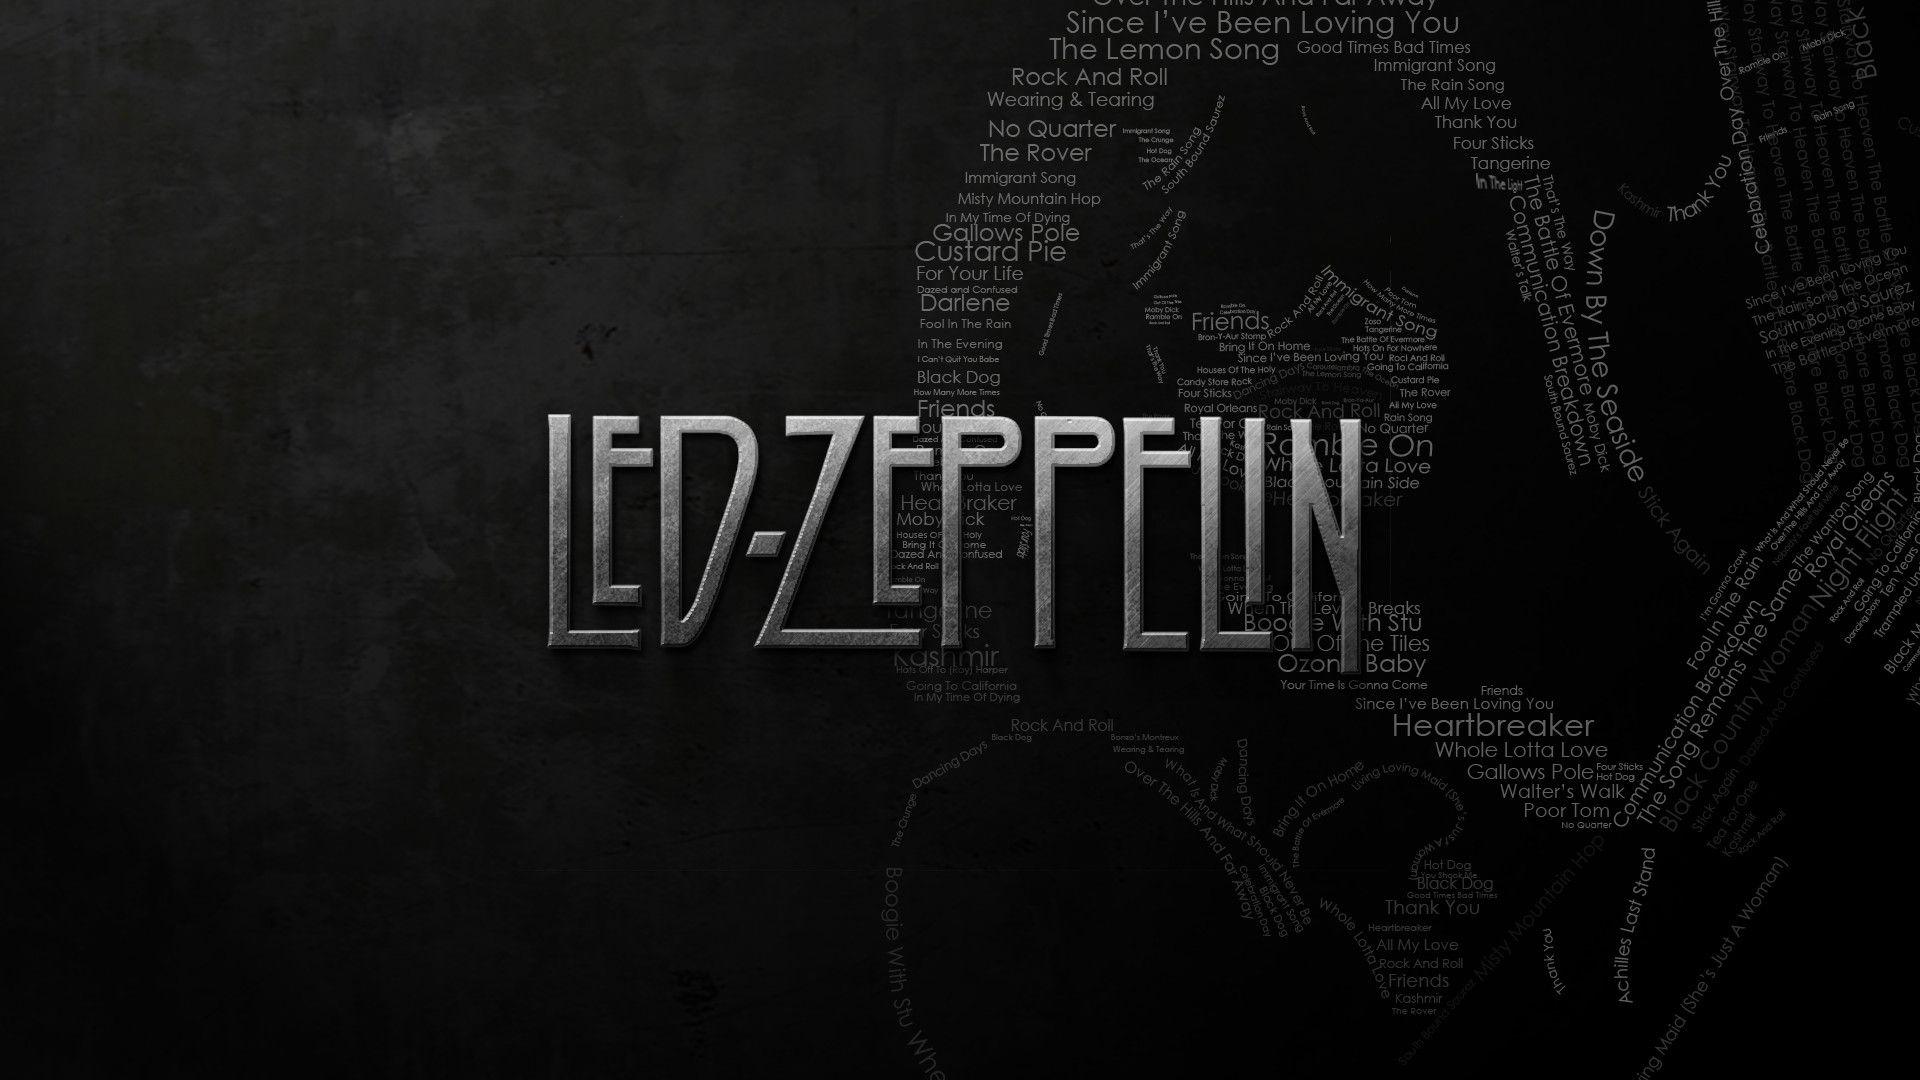 Led Zeppelin Wallpapers Top Free Led Zeppelin Backgrounds Images, Photos, Reviews